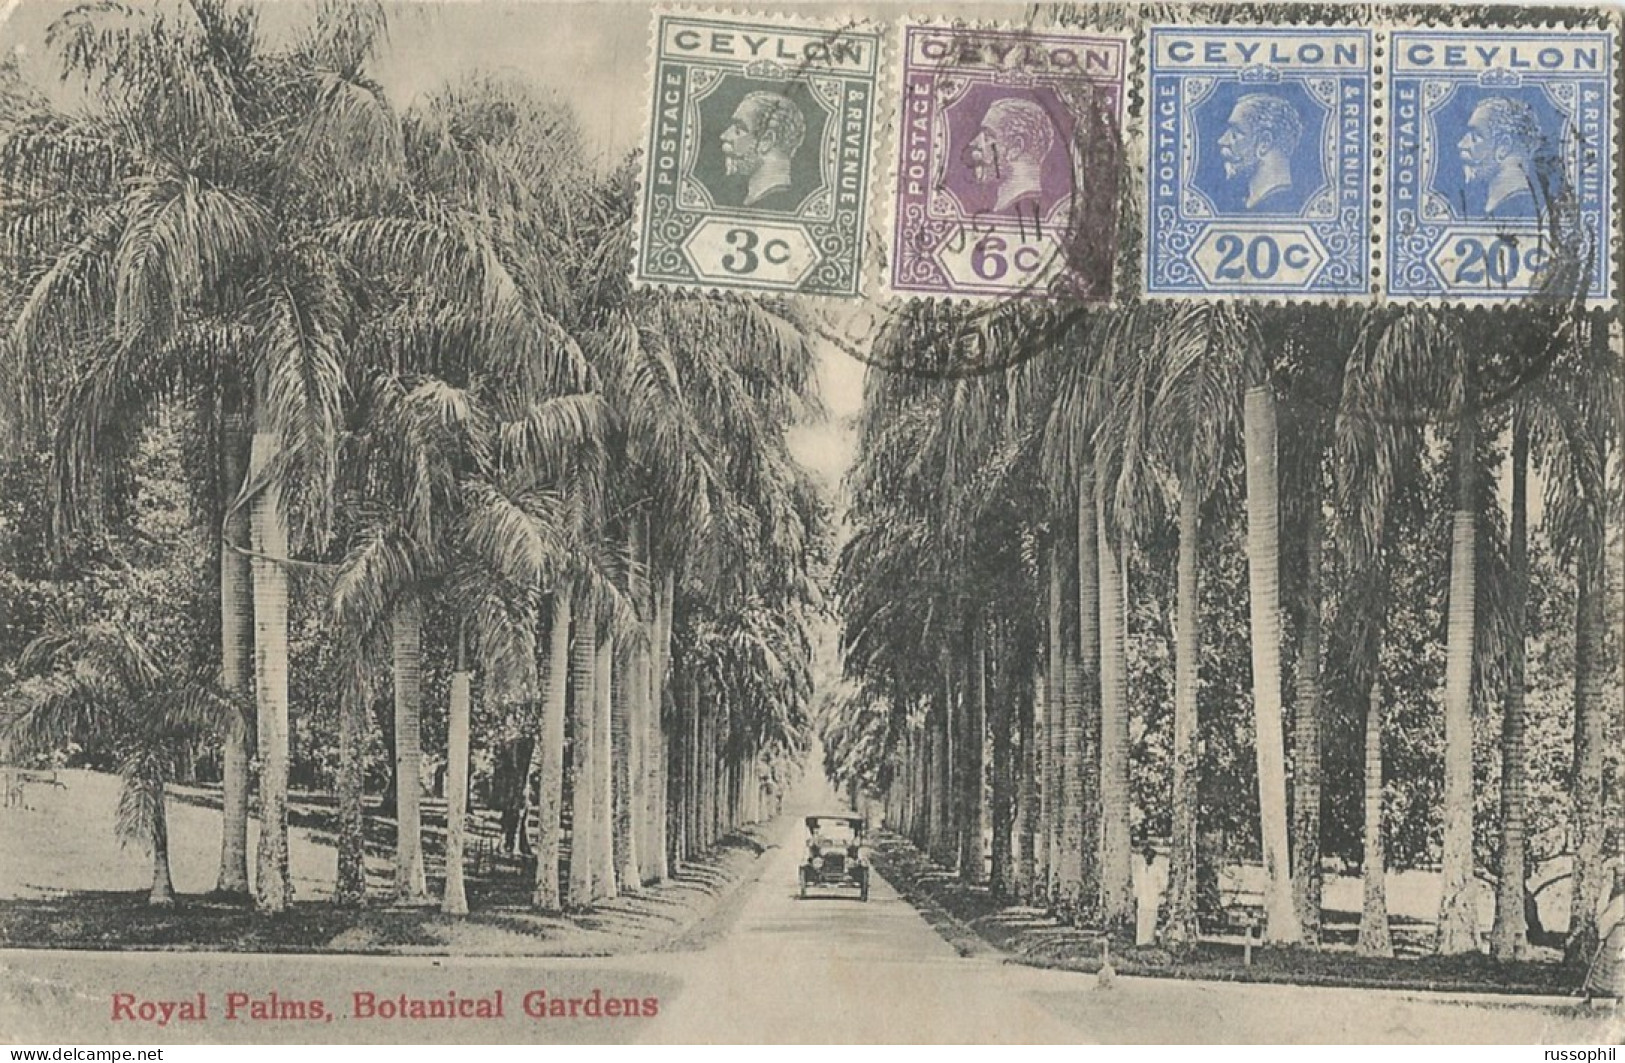 CEYLON – 4 STAMP 49 C FRANKING ON PC (VIEW OF COLOMBO) TO SWITZERLAND – AIR MAIL RATE – 1934 - Ceylon (...-1947)